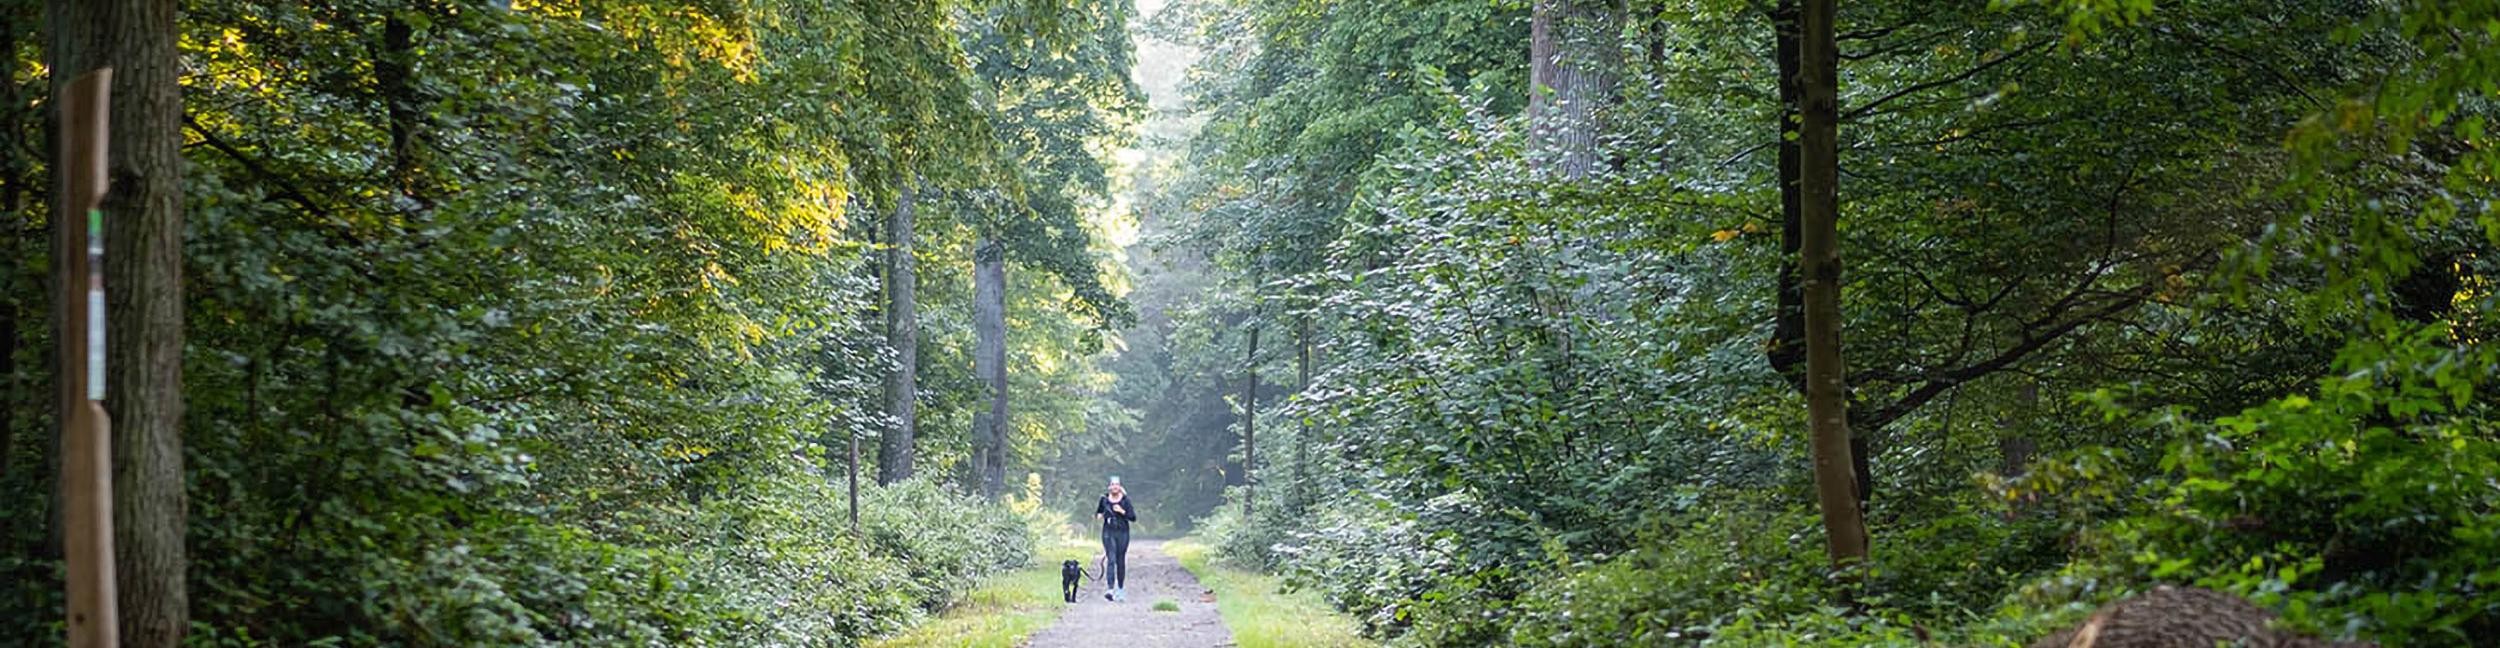 Öitgheim forest with walker and dog